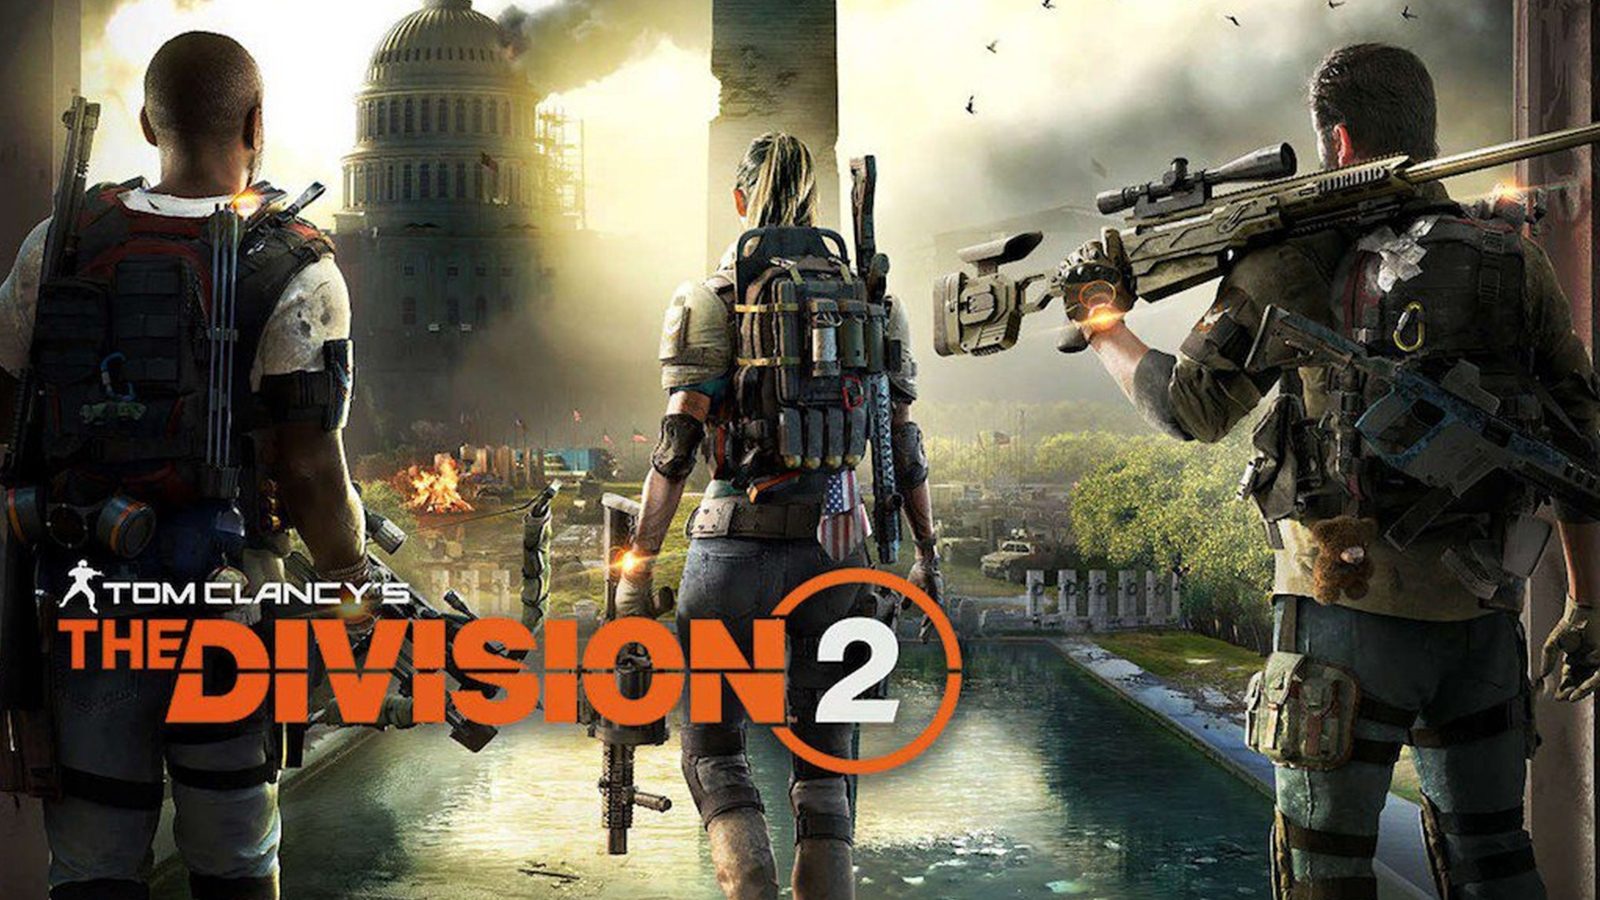 fly øje skilsmisse When is Tom Clancy's The Division 2 coming out? Release date, early access,  and Year 1 plans - Dexerto